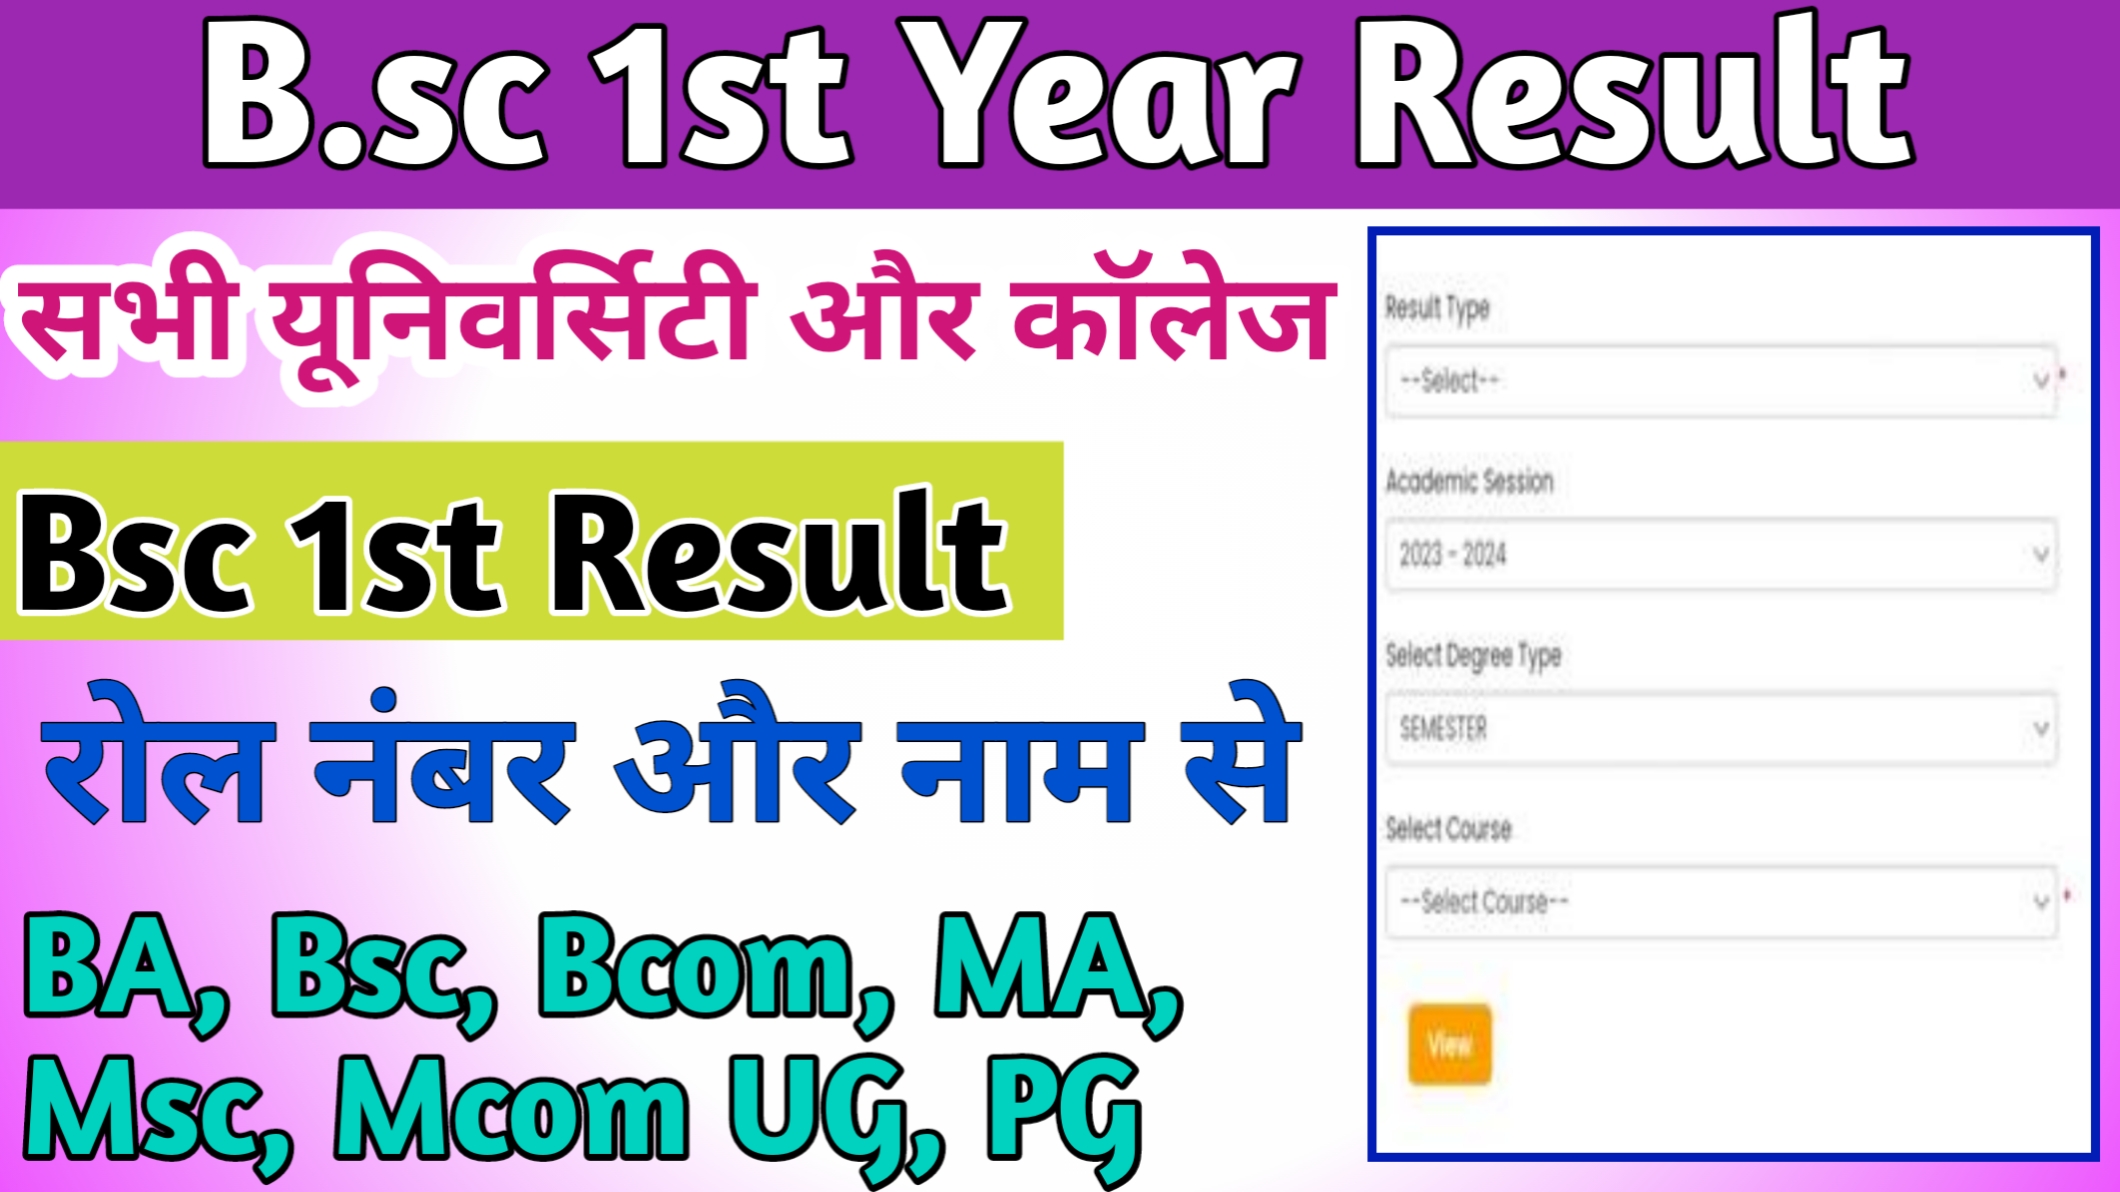 Bsc 1st Year Result